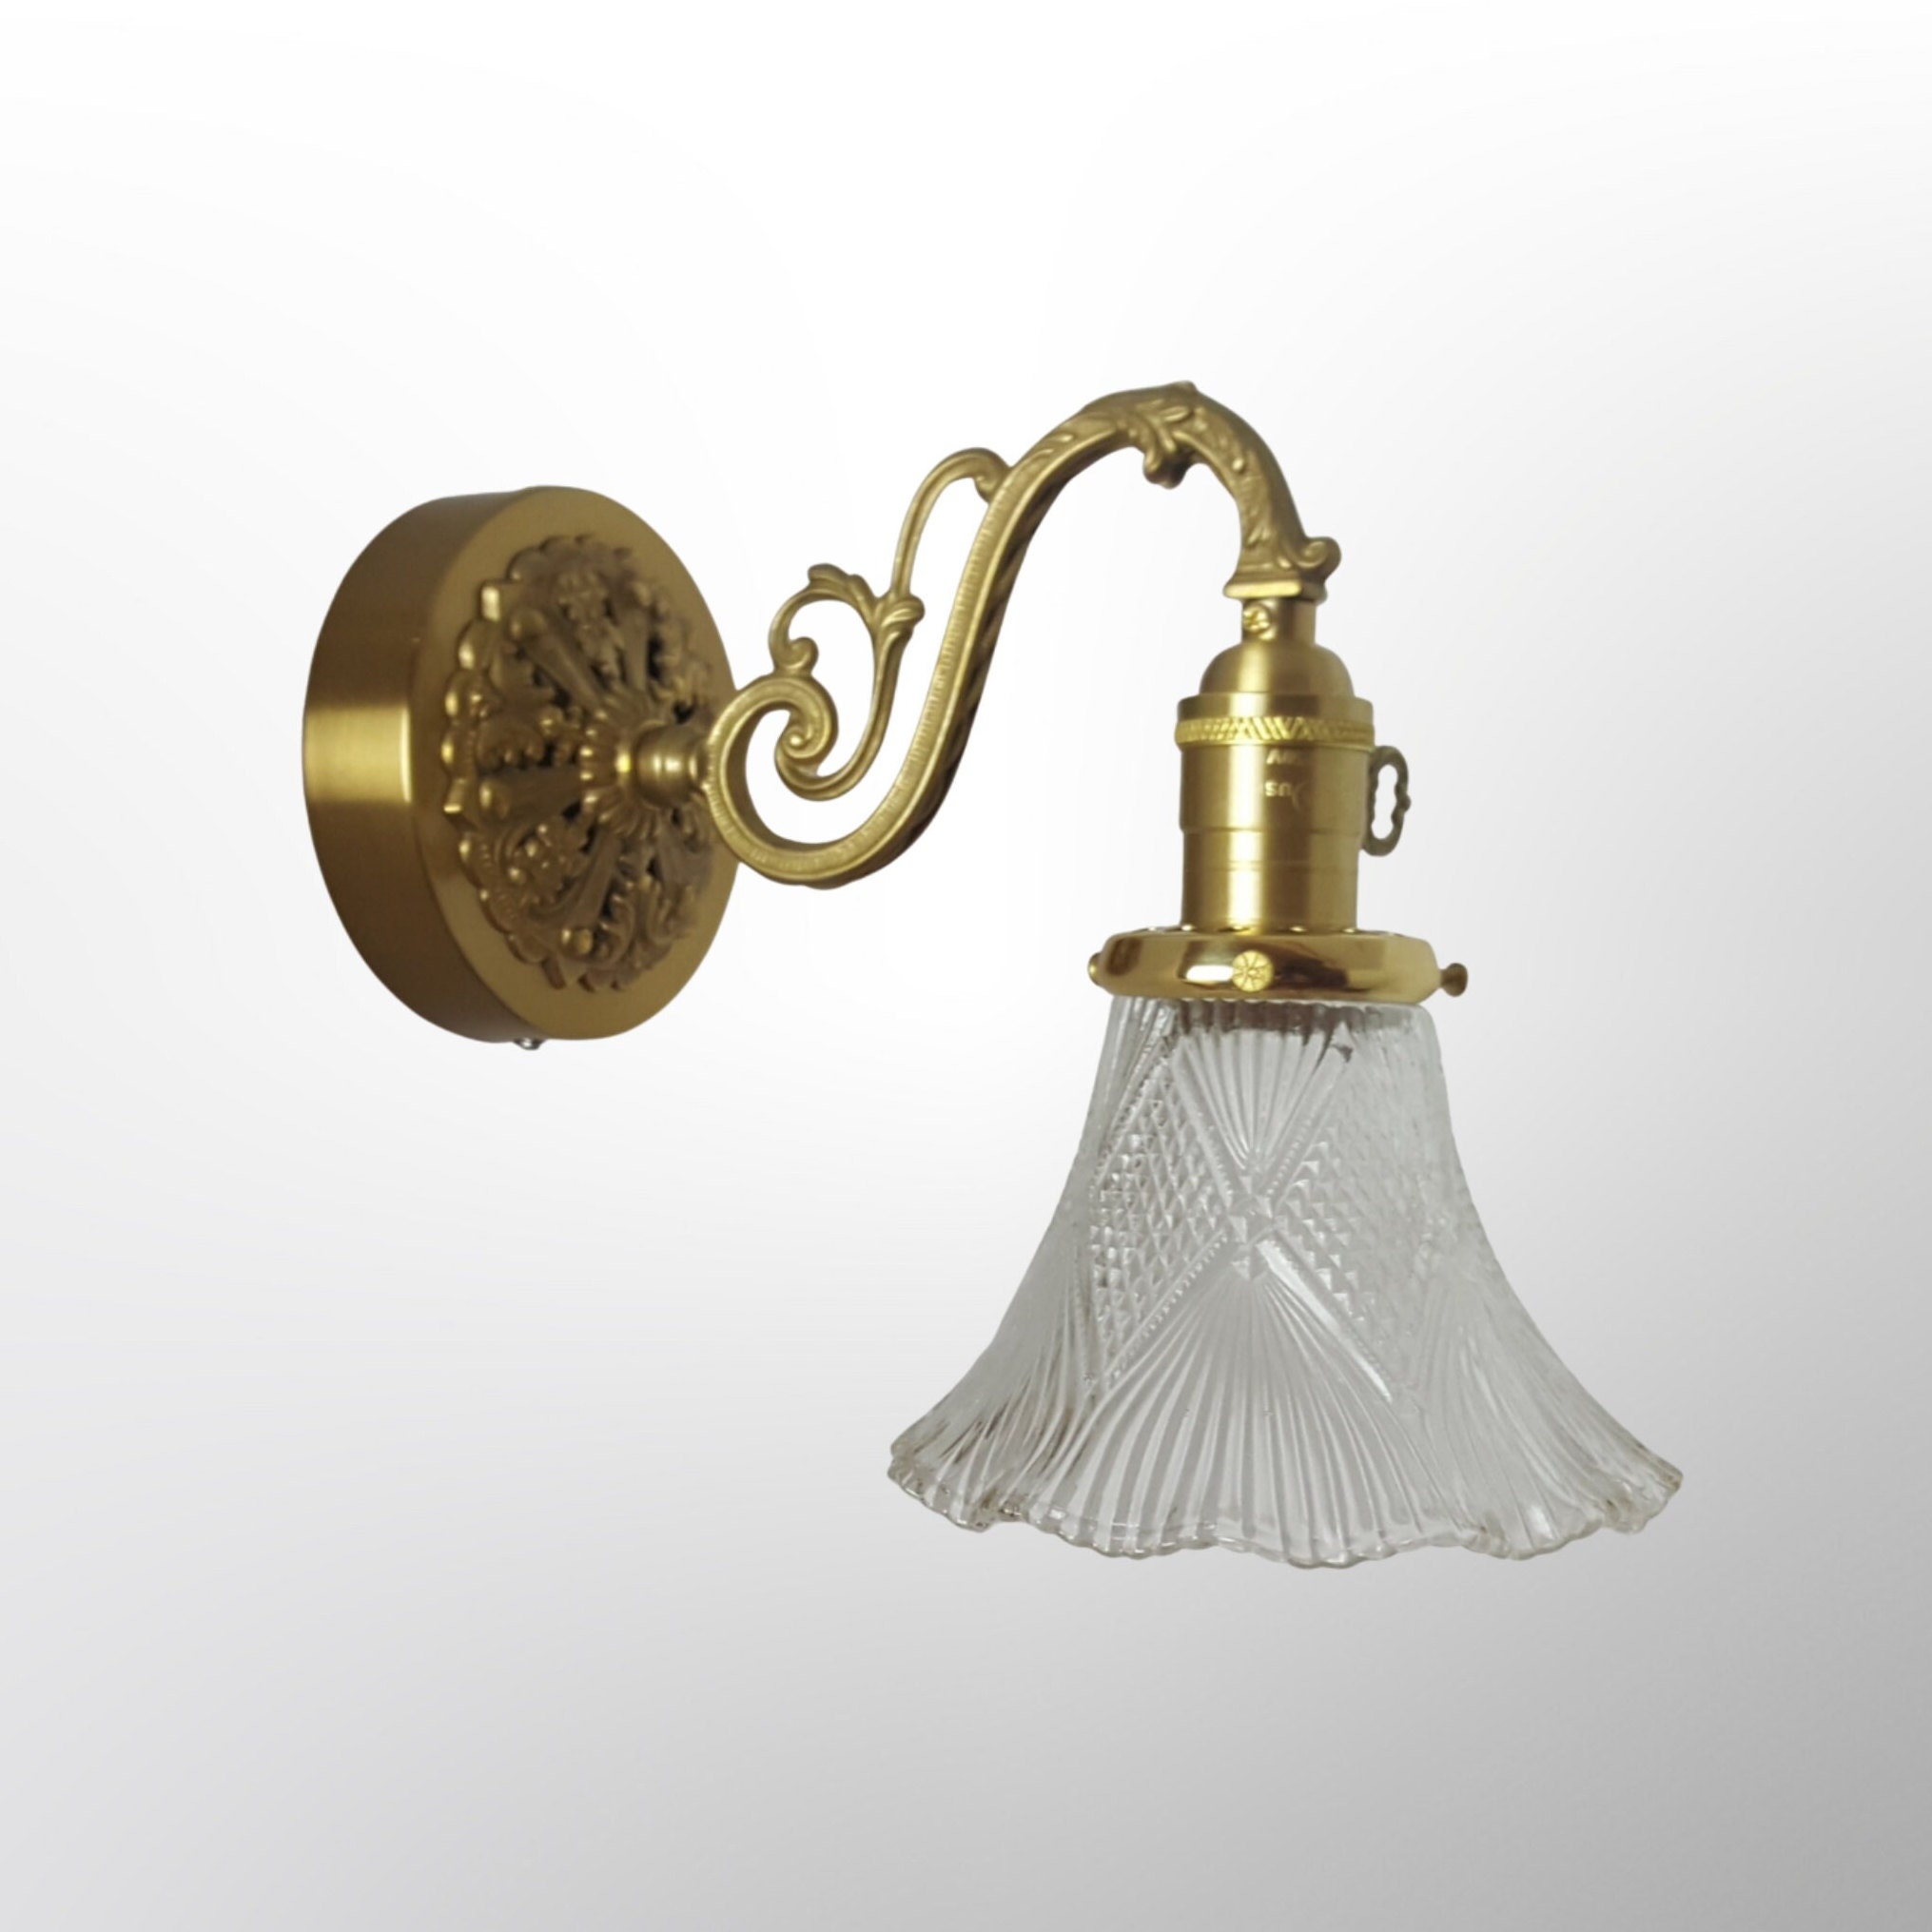 Decorative Brass Traditional Victorian Style Wall Sconce Light